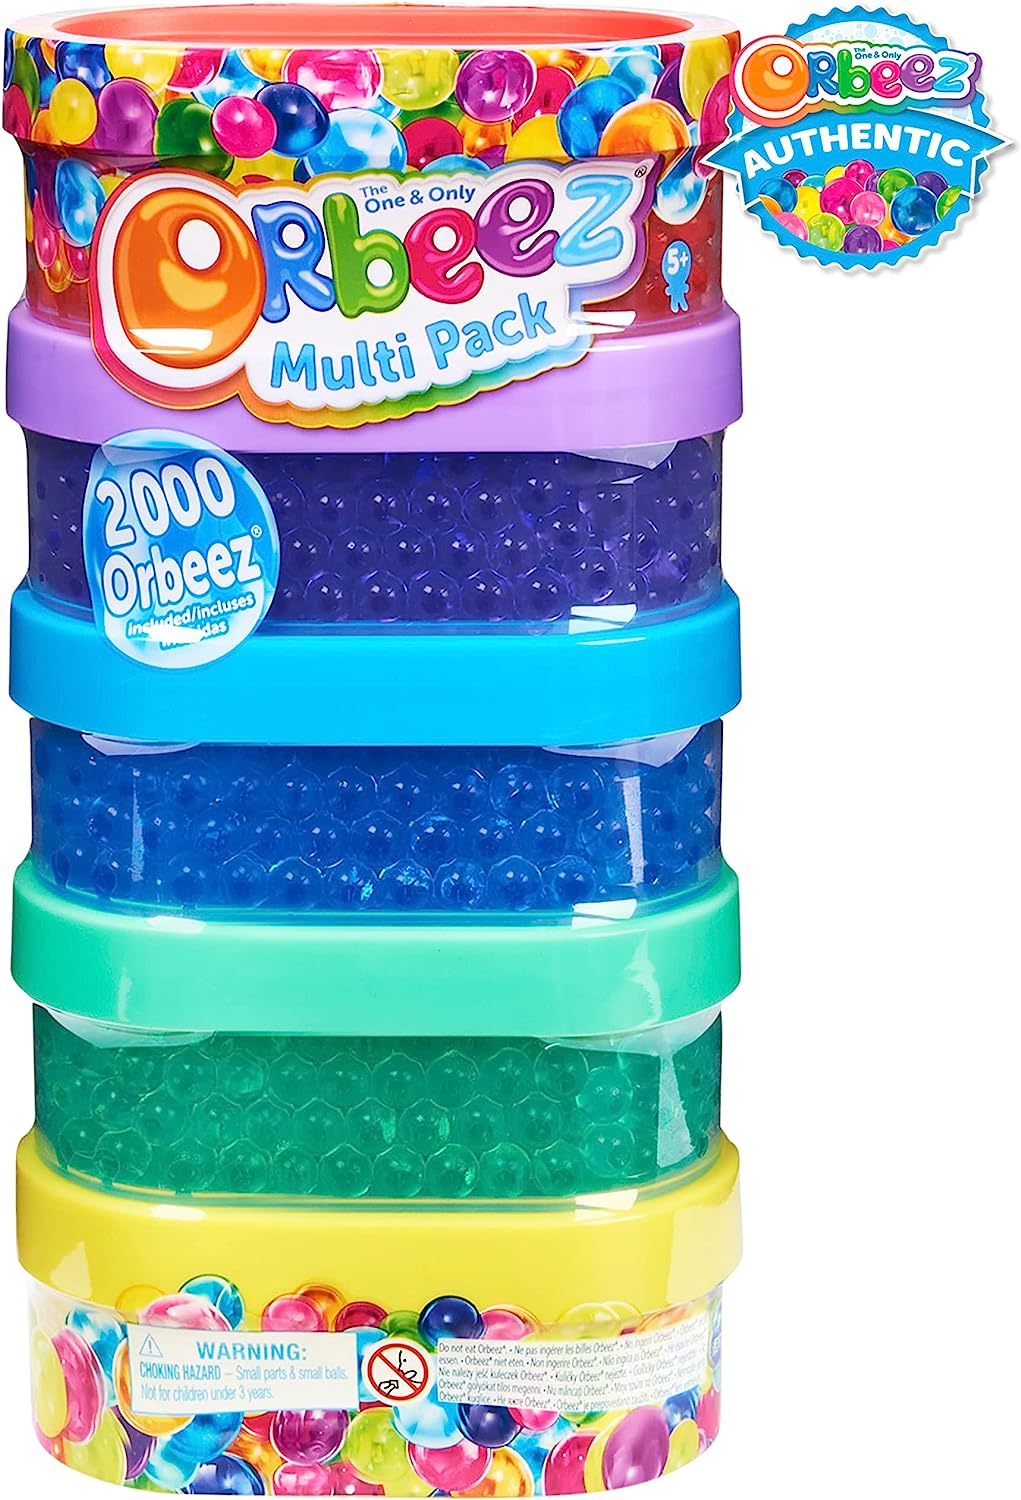 THE ONE & ONLY ORBEEZ MULTI PACK  - 2,000 ORBEEZ INCLUDED!